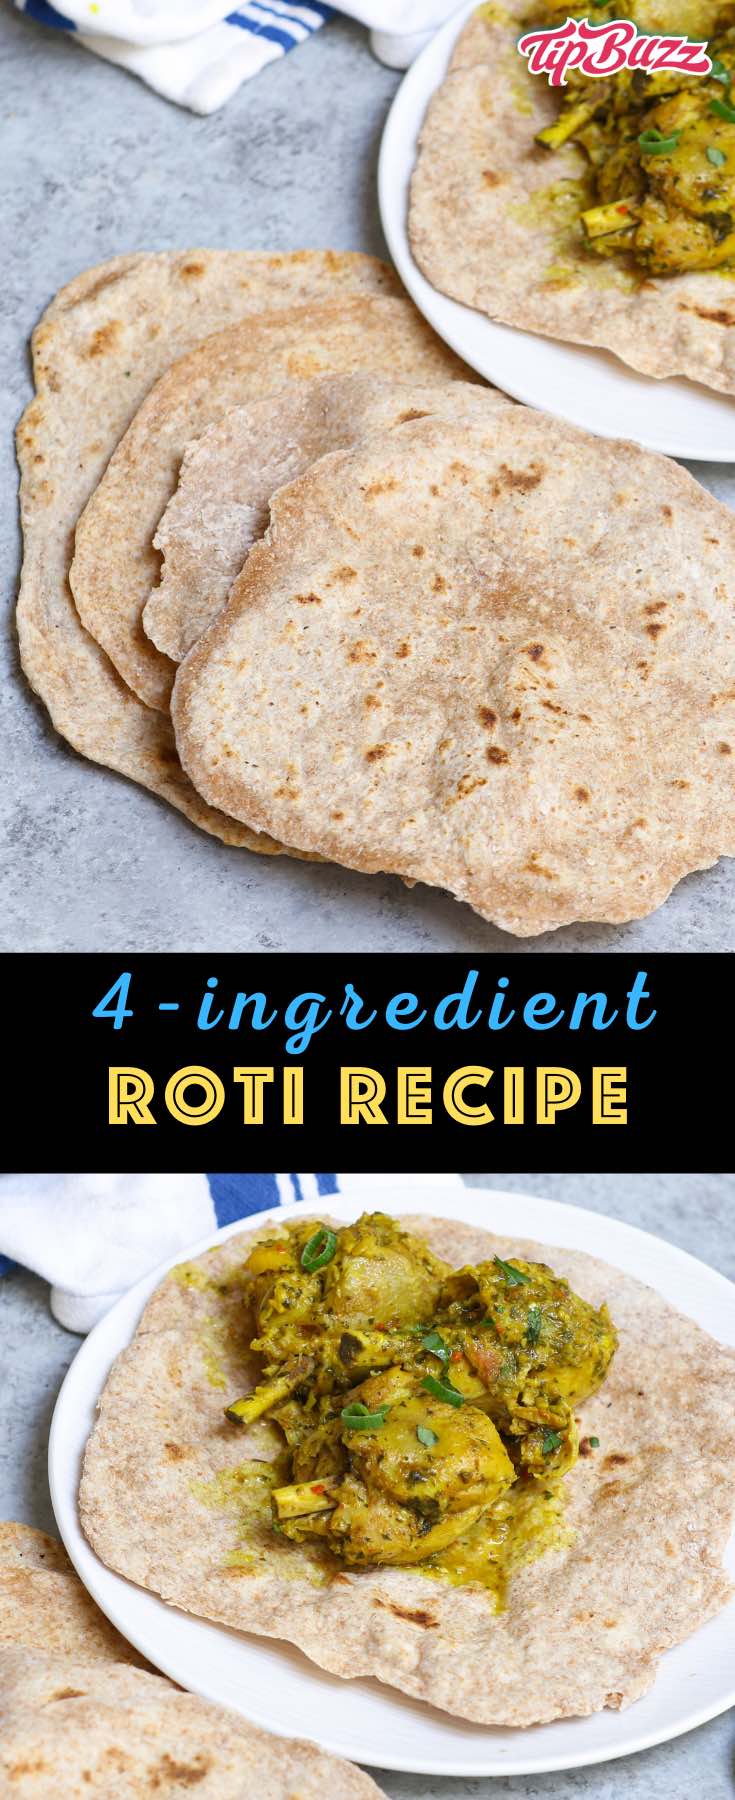 Learn how to make soft and delicious roti the easy way! This recipe shows you step-by-step preparation and tips. Perfect for serving with Indian and West Indies dishes. #roti